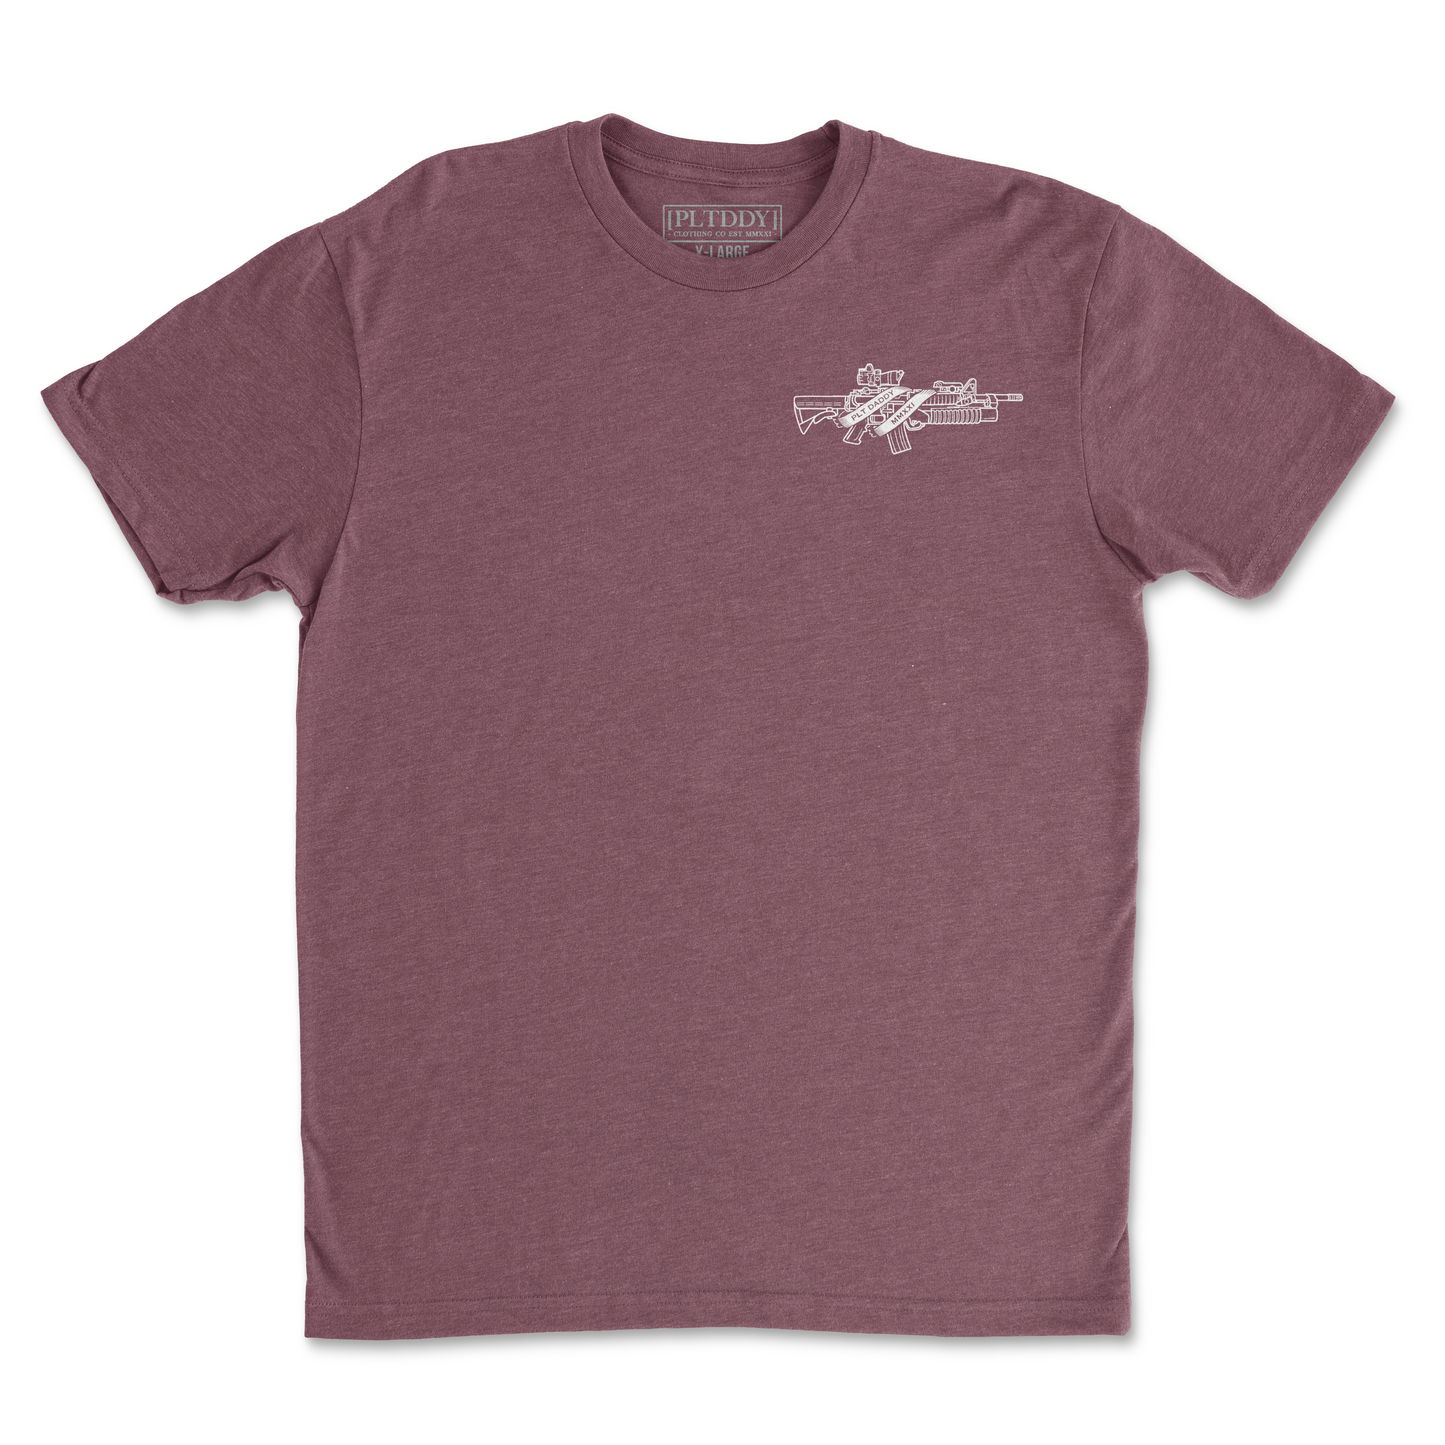 The Paratrooper Tee